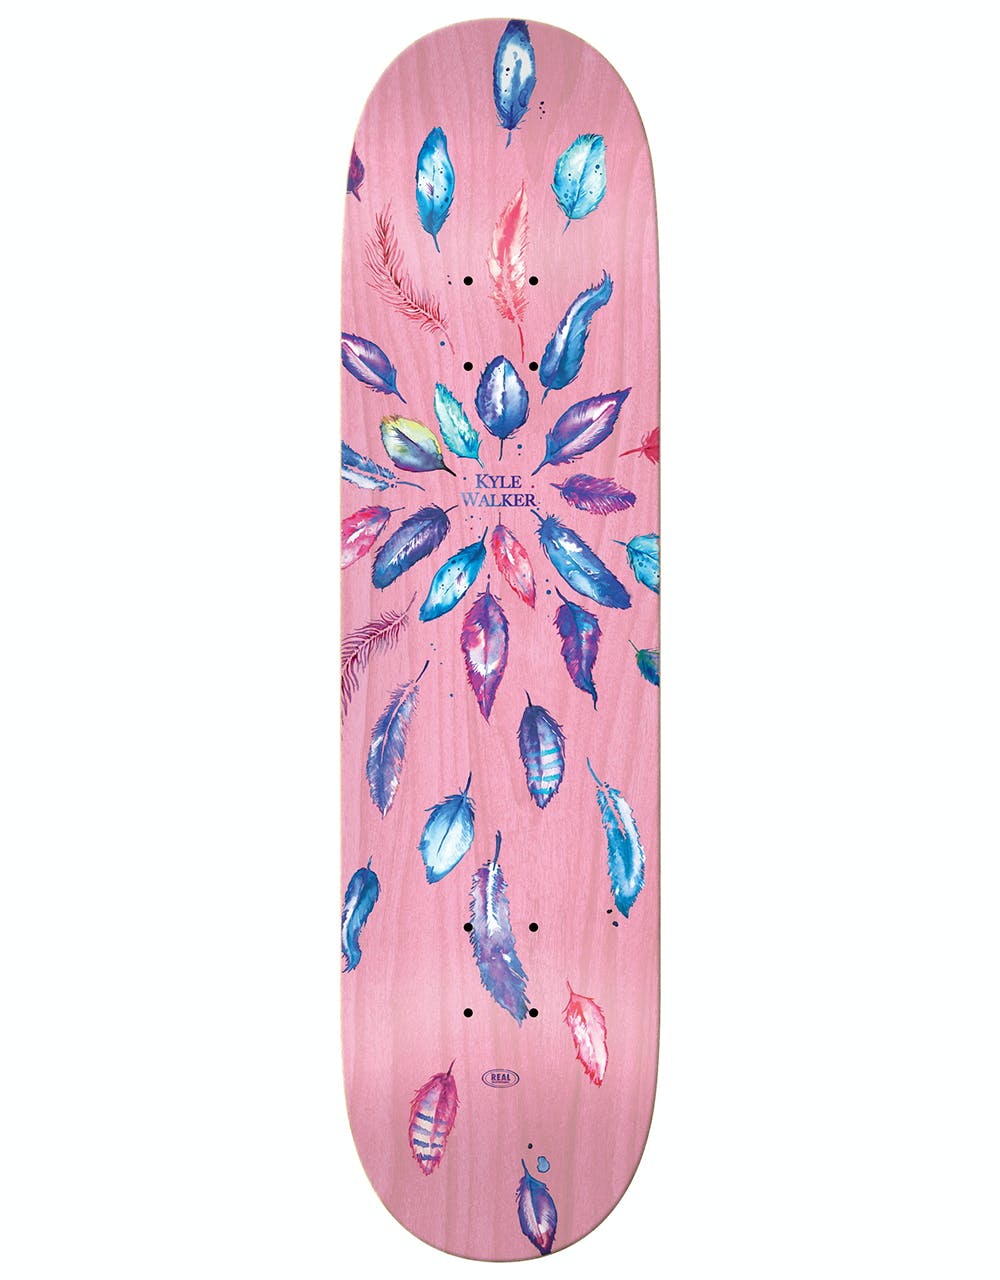 Real Kyle Wild Feathers Skateboard Deck - 8.38"